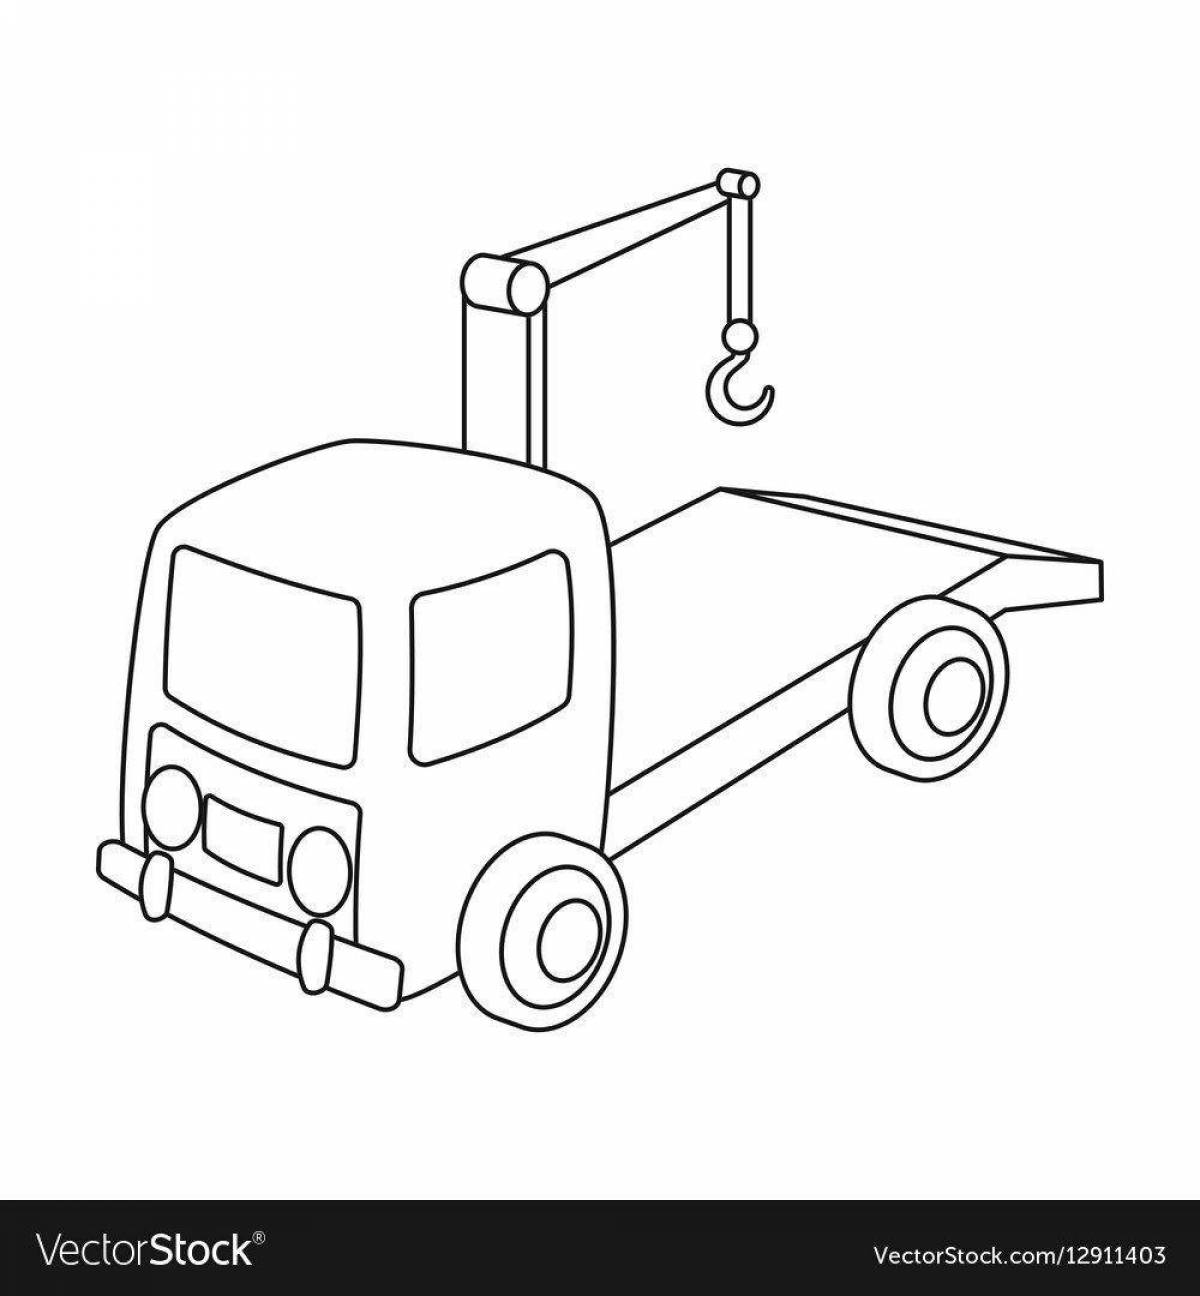 Shining tow truck coloring book for kids